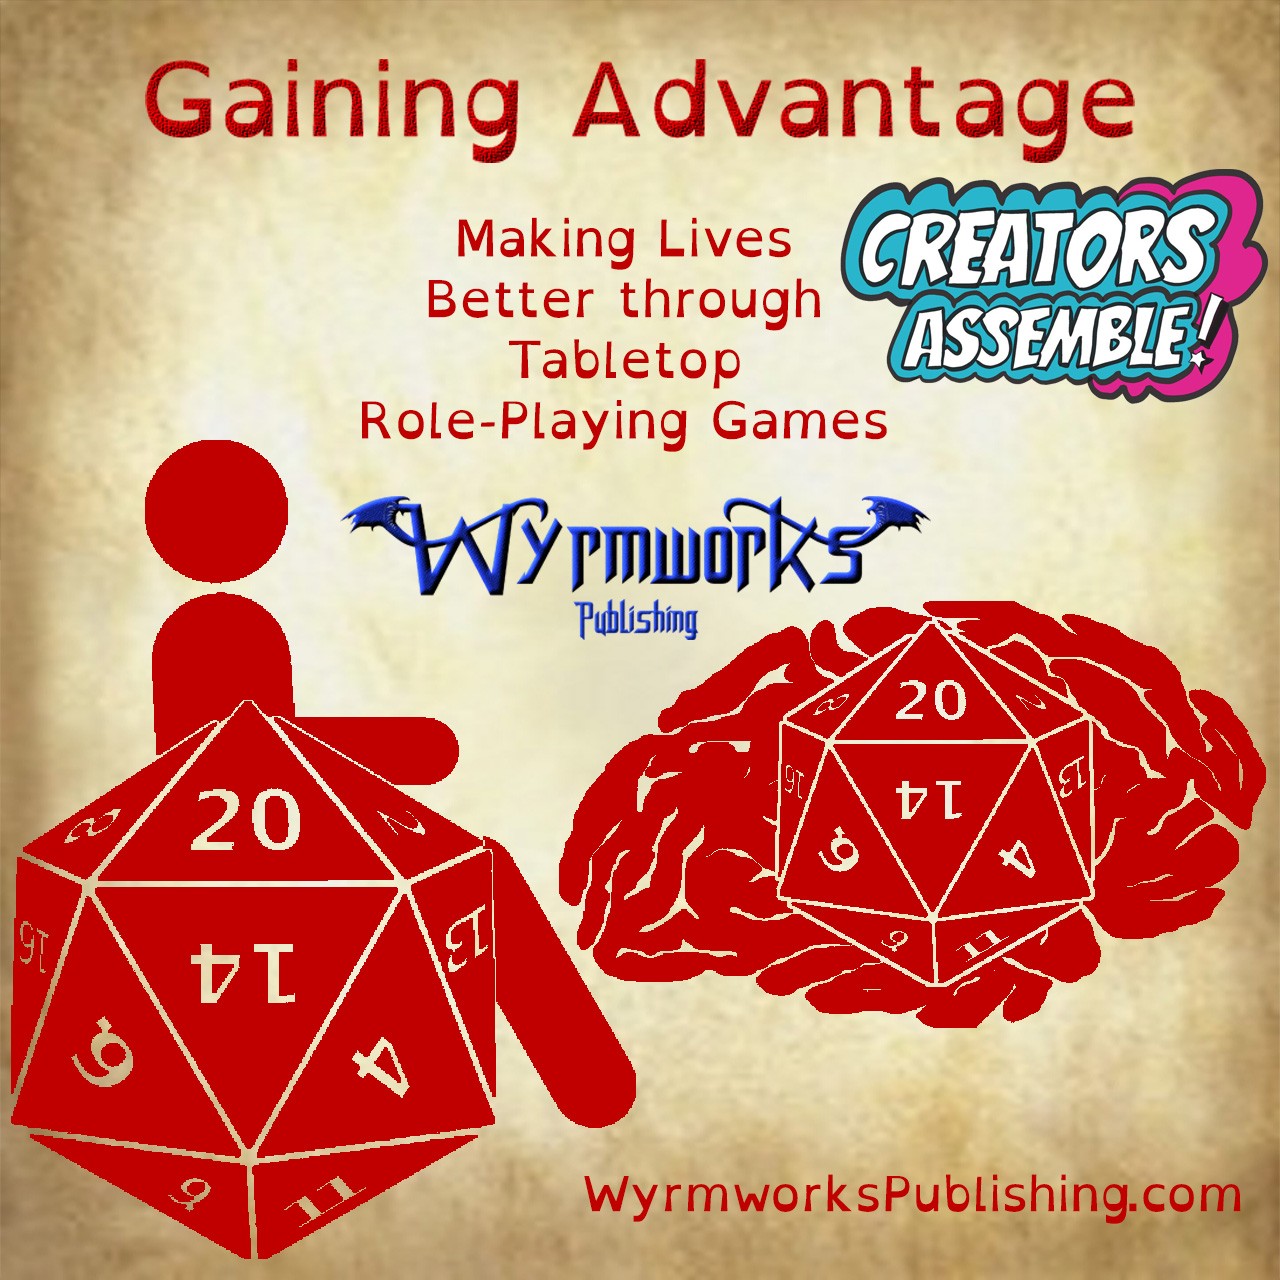 Gaining Advantage: Making Lives Better through tabletop role-playing games; Wyrmworks Publishing Logo; Creators Assemble! logo; Disability symbol with wheelchair wheel replaced by d20; Brain with embedded d20